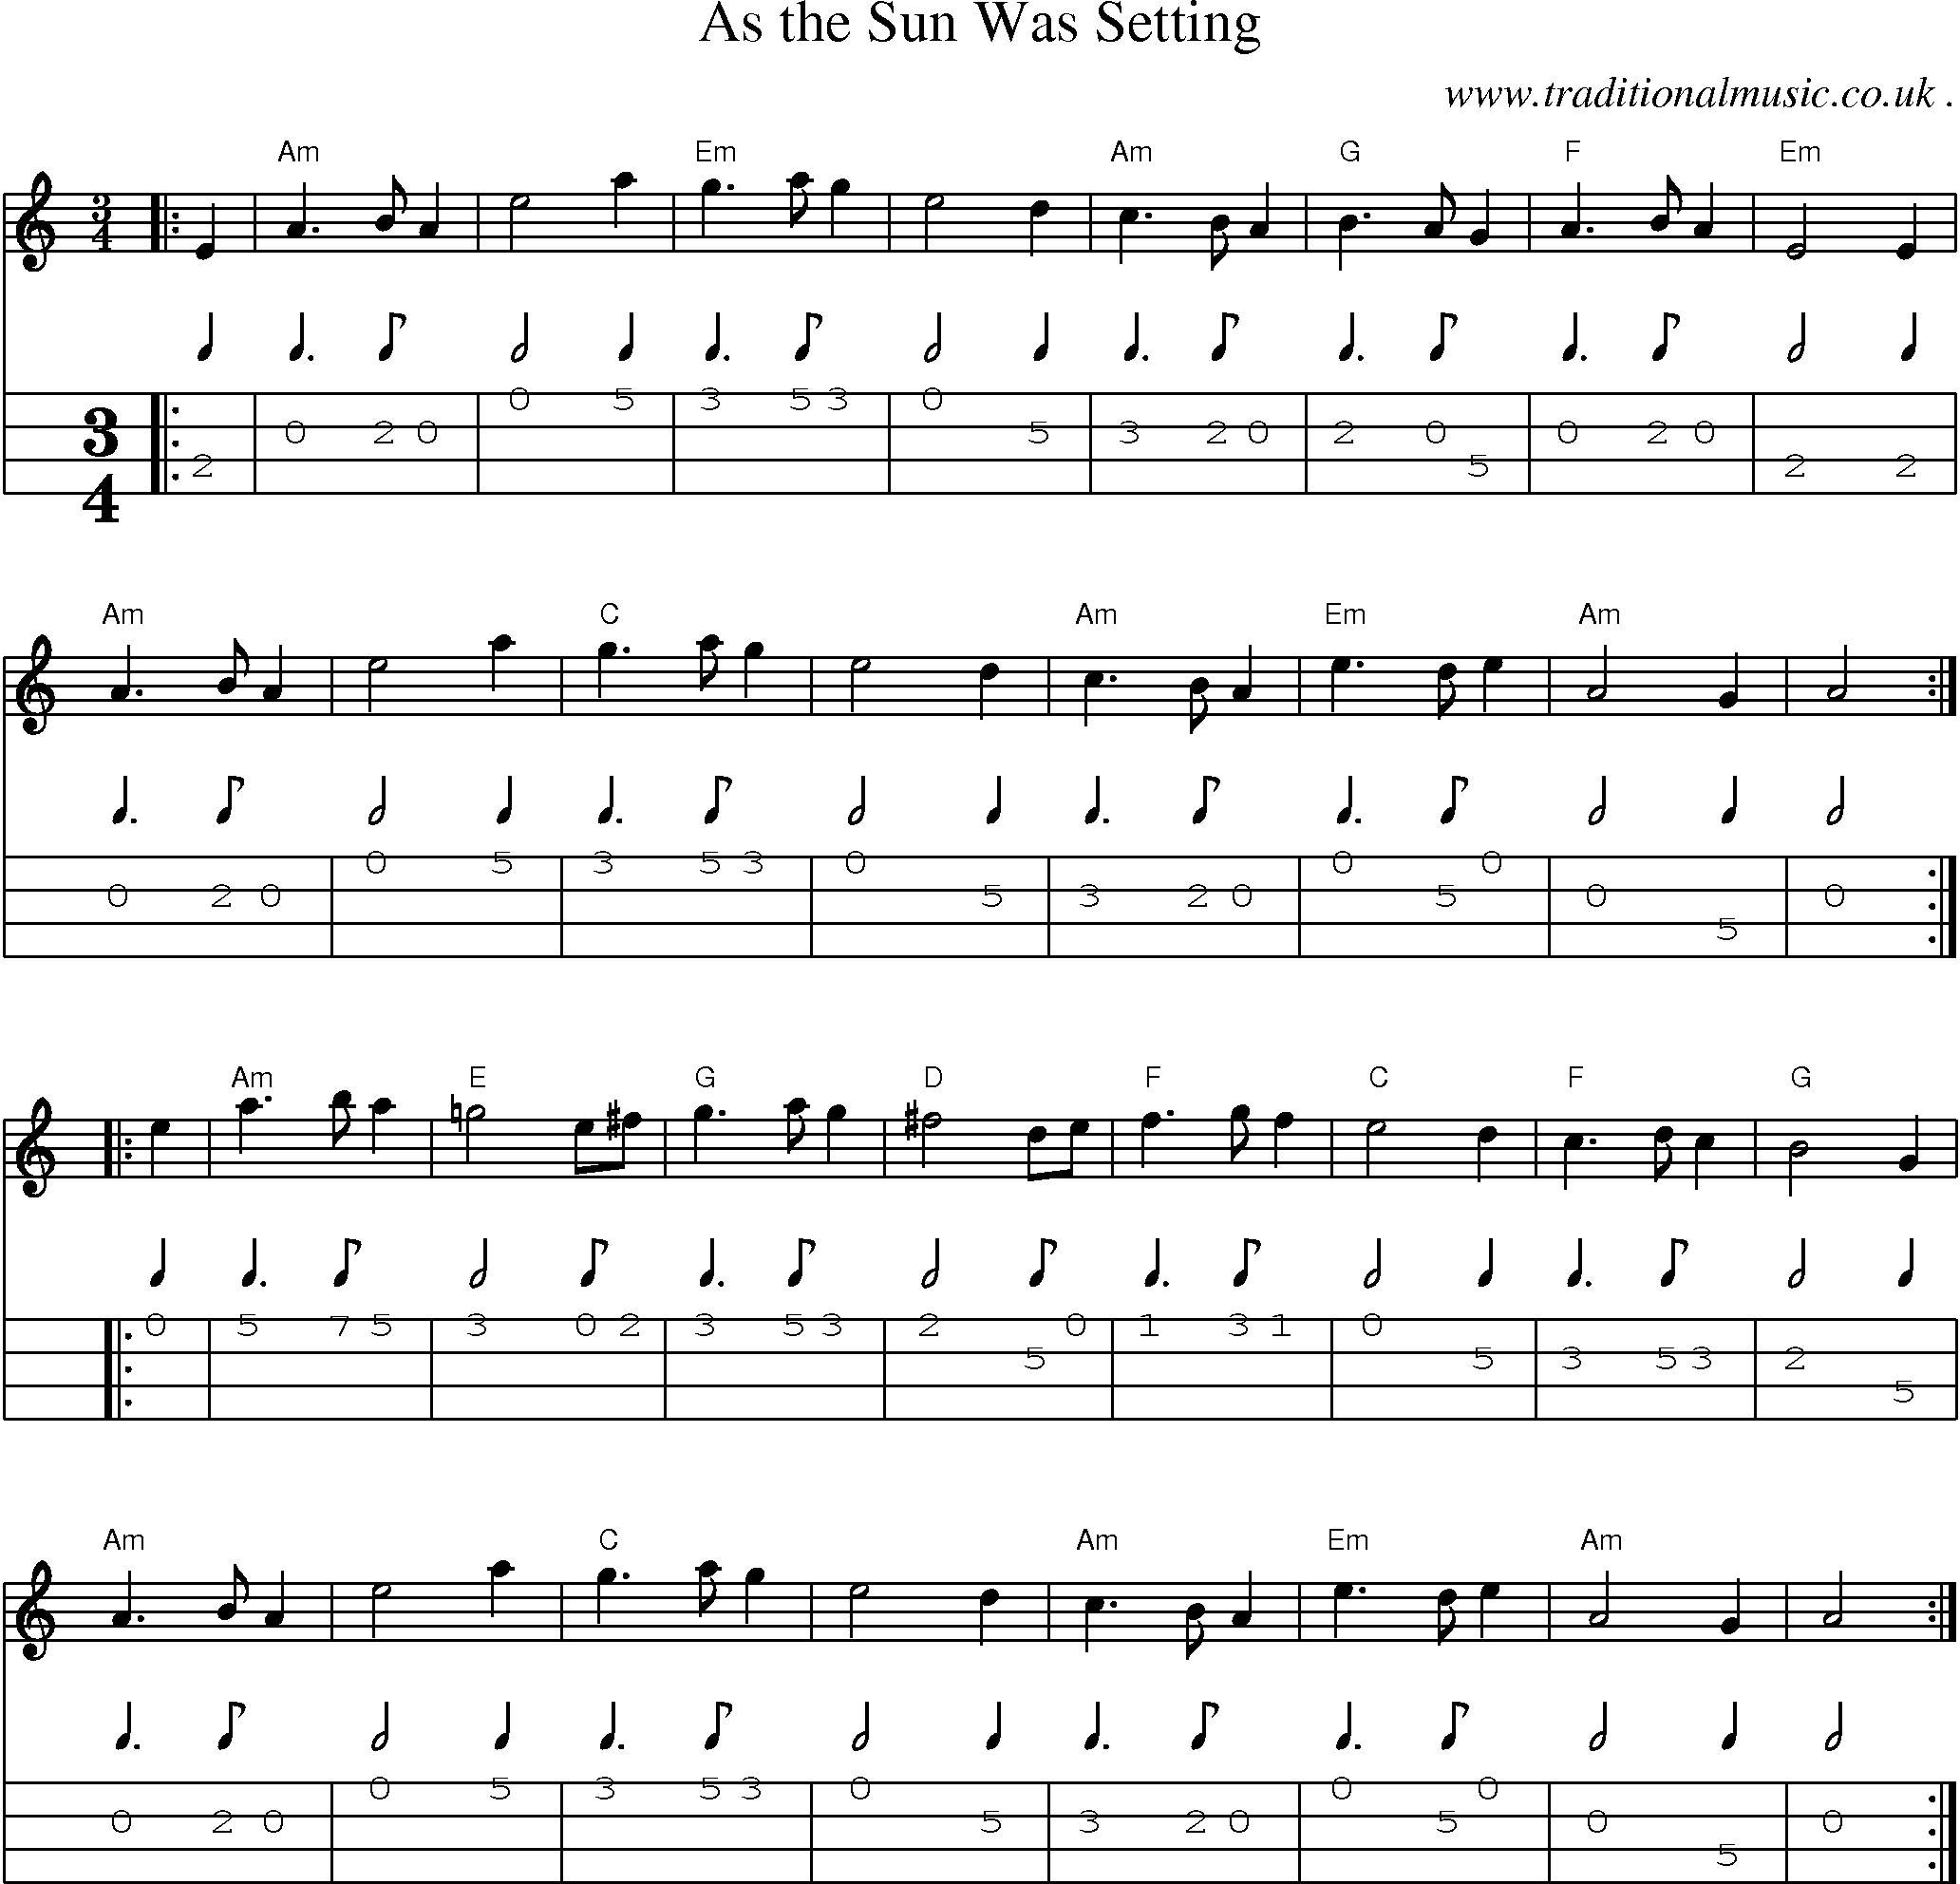 Music Score and Guitar Tabs for As The Sun Was Setting